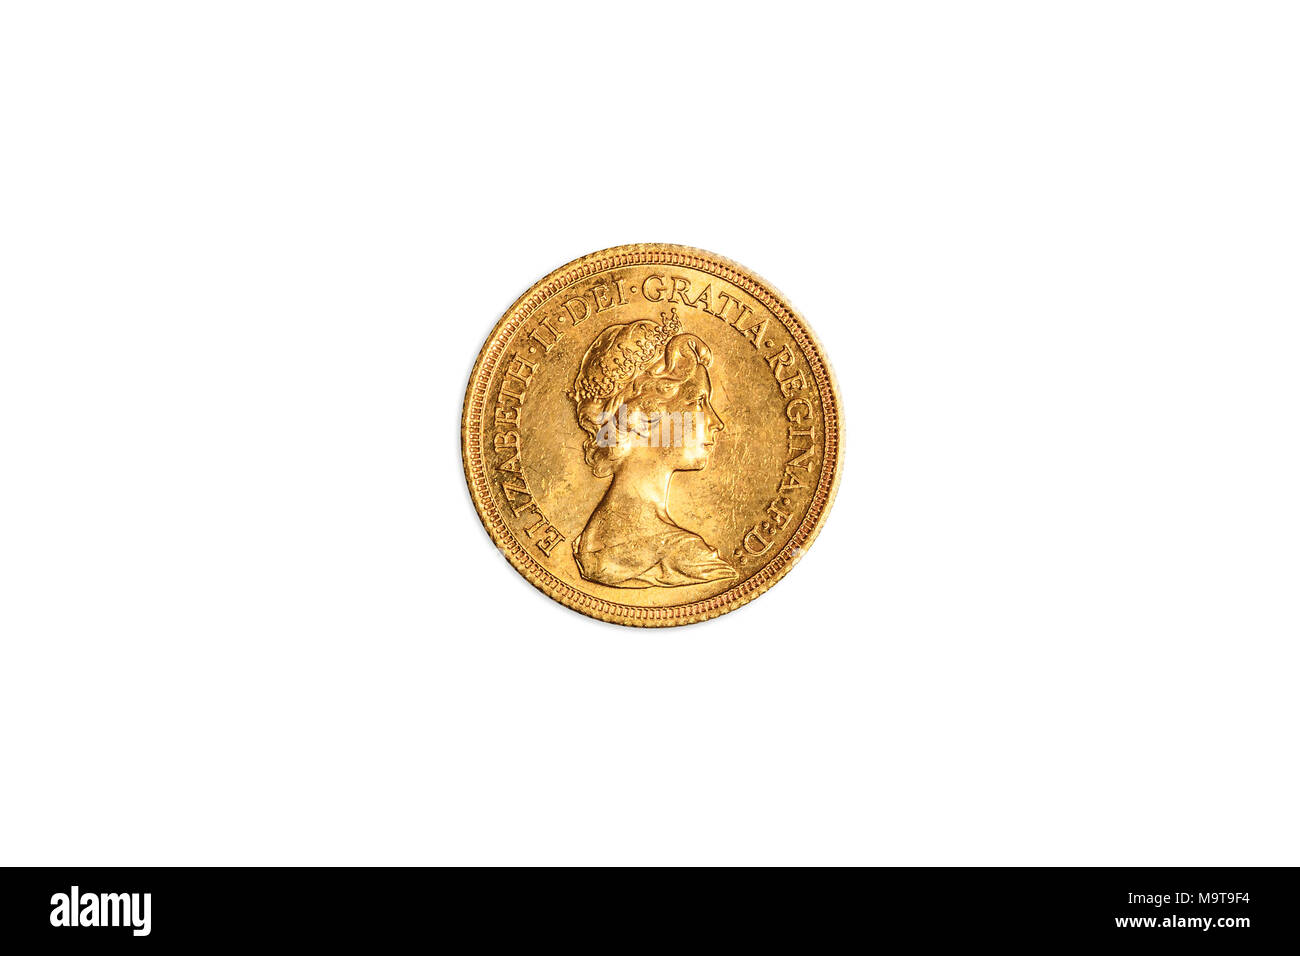 Great Britain one gold coin of UK pound, GBP english currency, close up of the head side of queen Elizabeth II sterling of 1976. Isolated on white studio background. Stock Photo